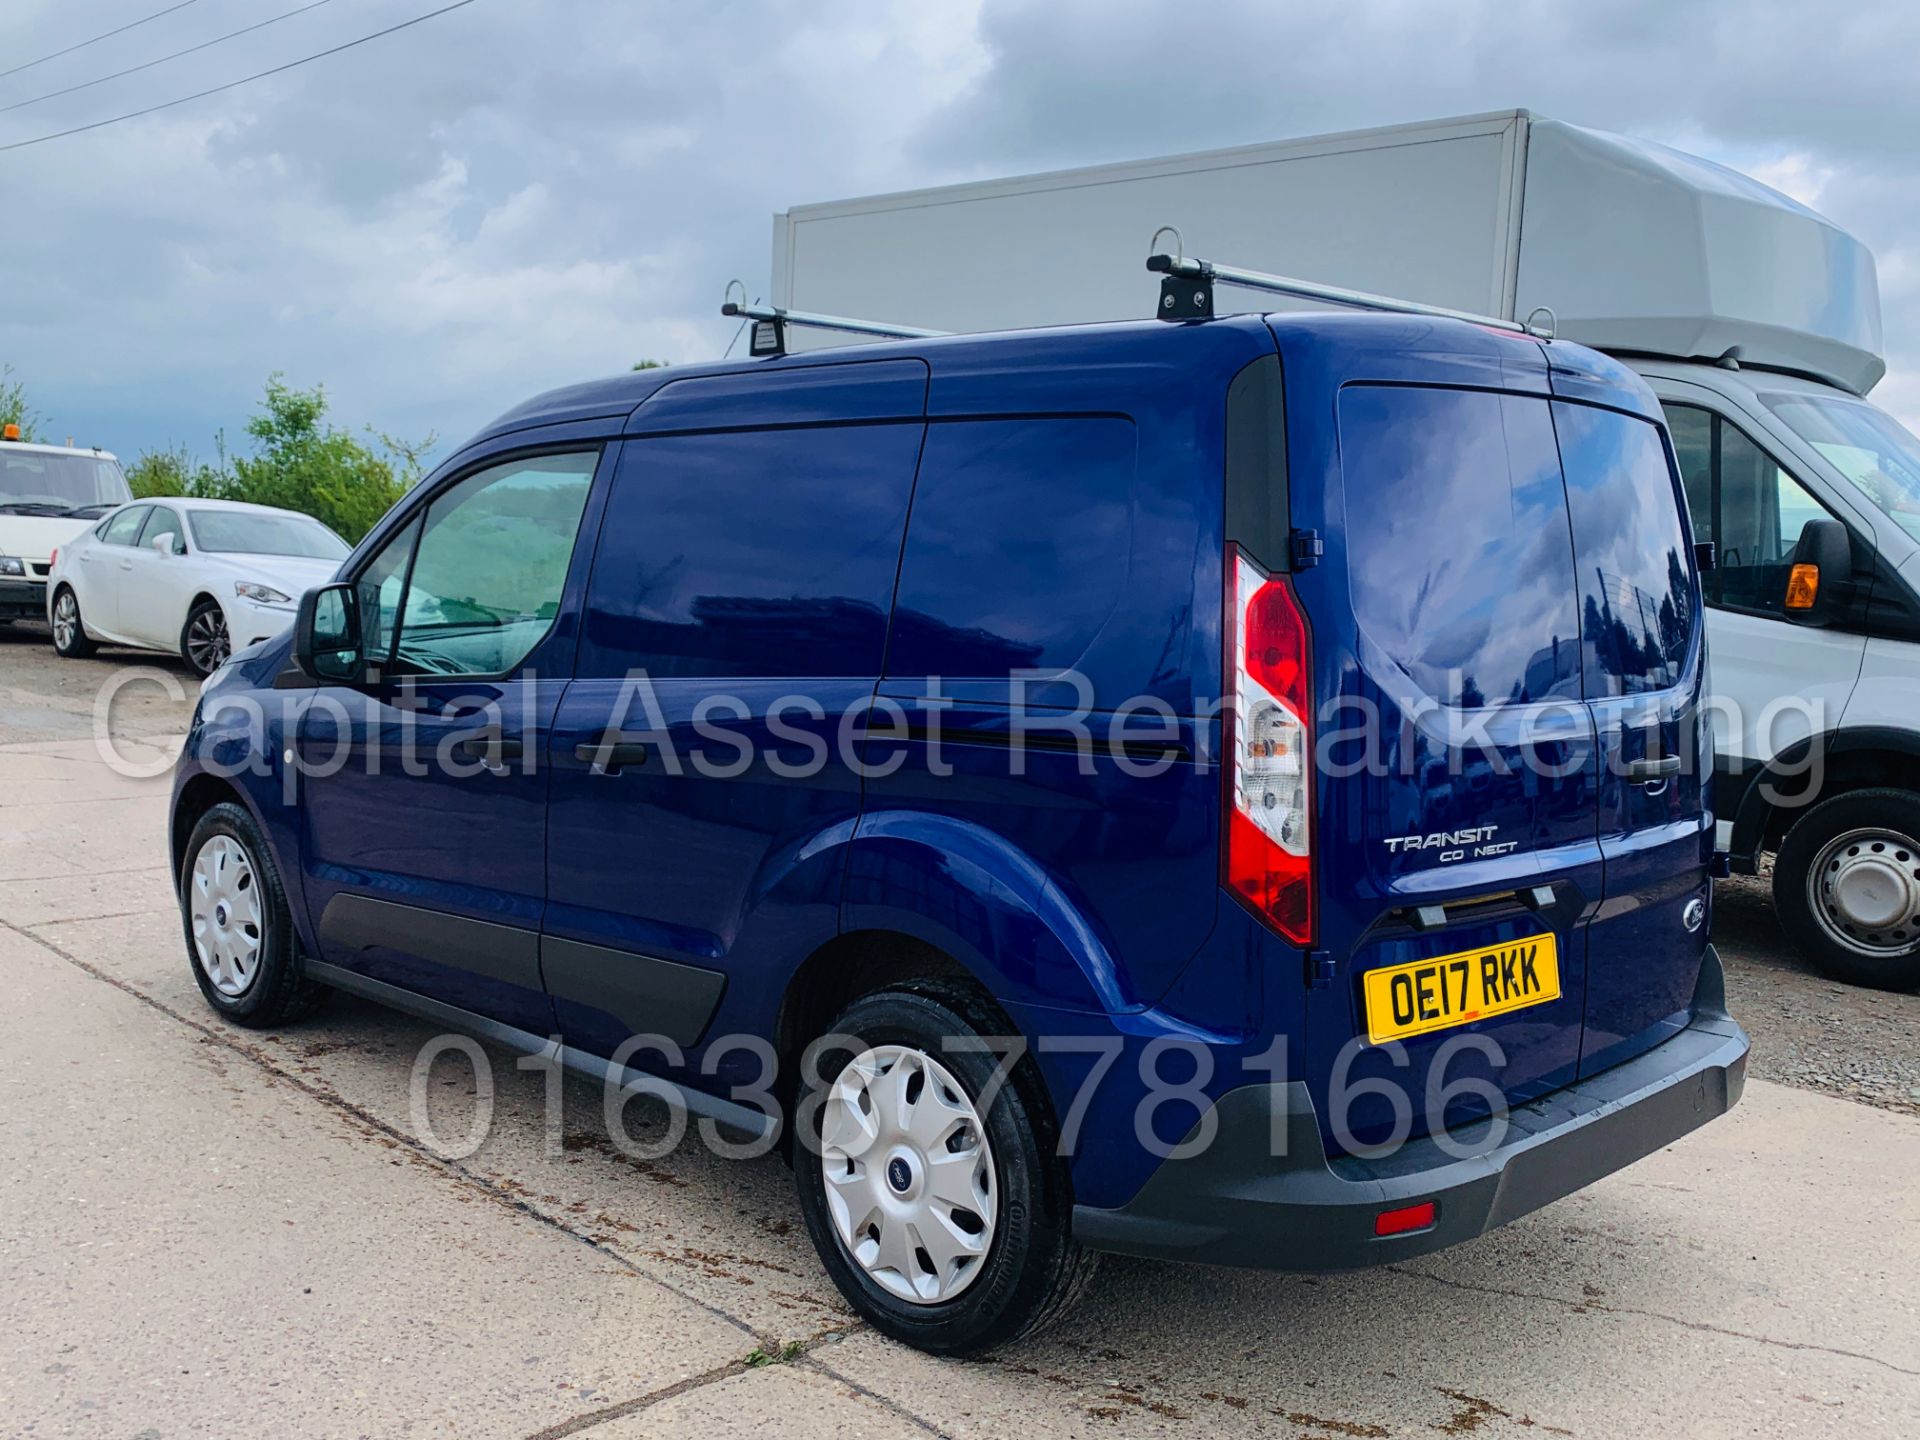 (On Sale) FORD TRANSIT CONNECT *TREND* SWB (2017 - EURO 6 VERSION) '1.5 TDCI - 100 BHP' (1 OWNER) - Image 5 of 39